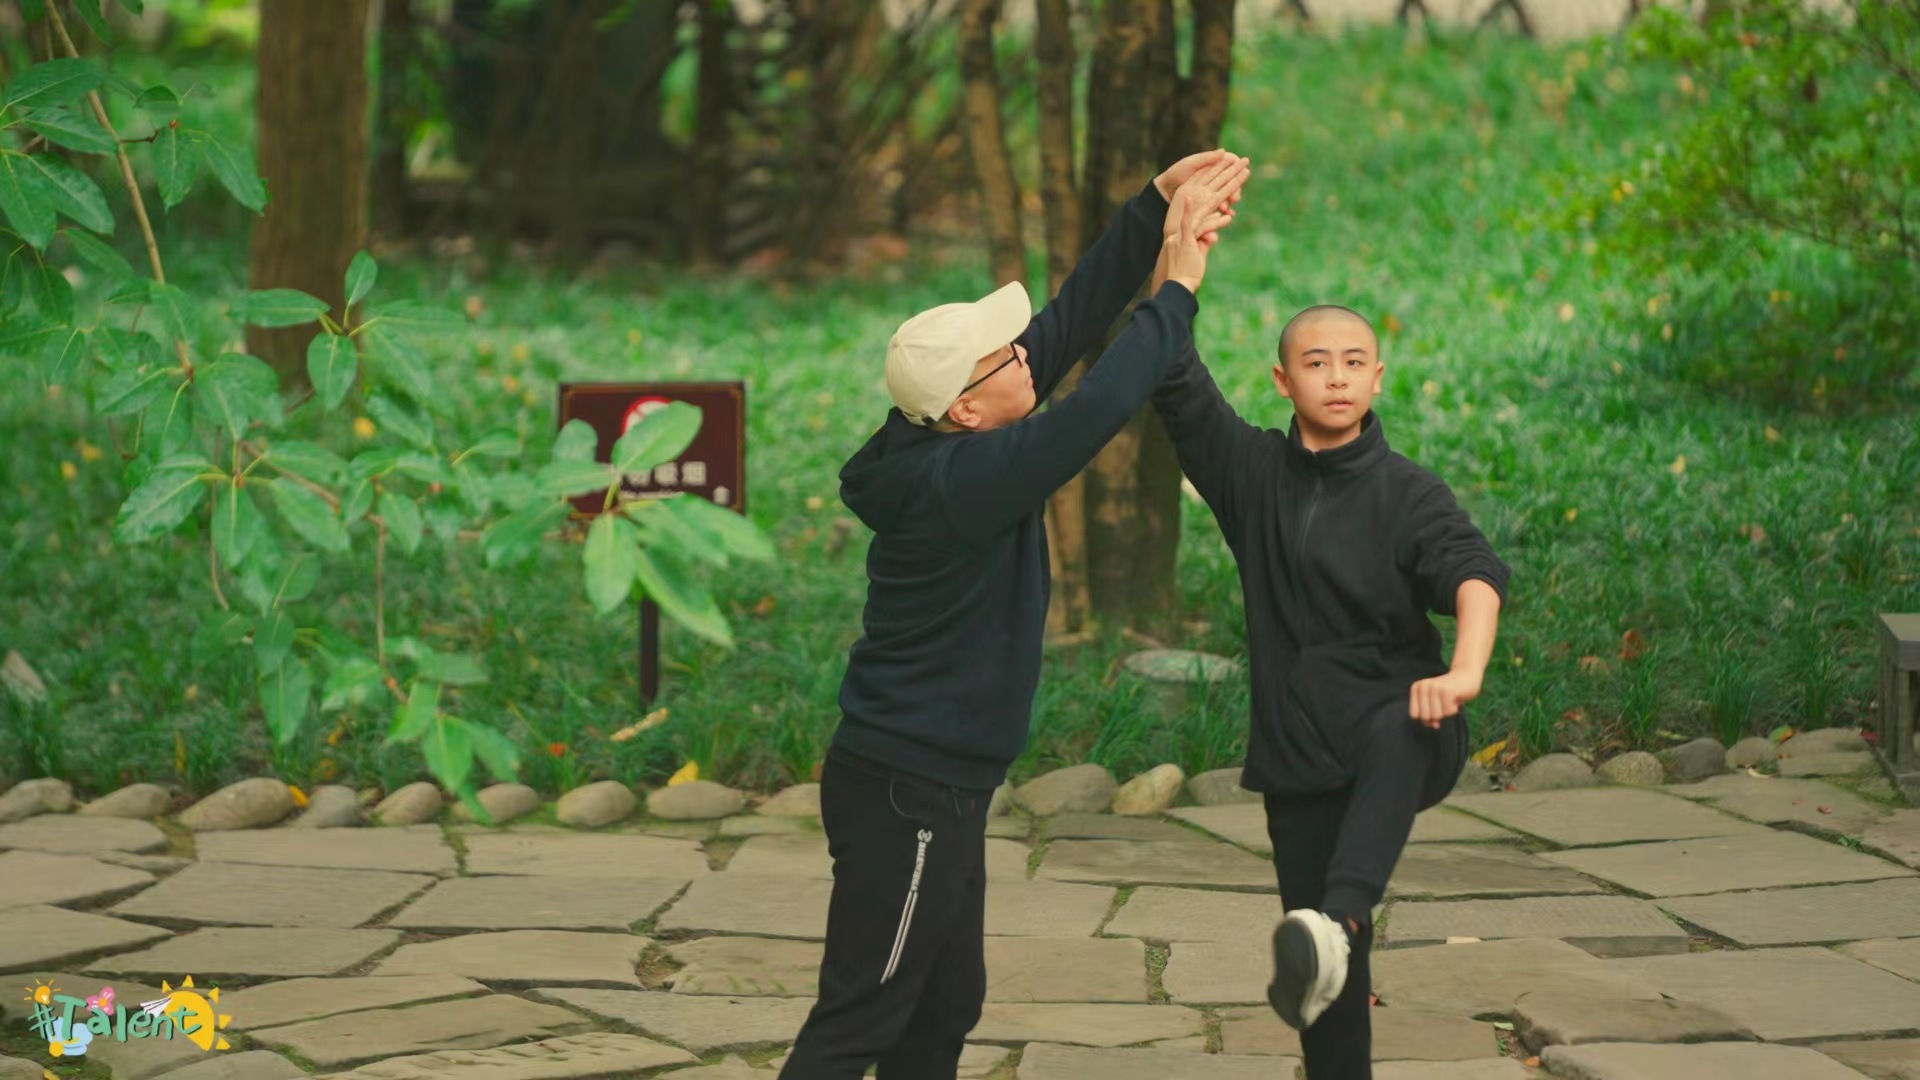 Hu Yibo practices Sichuan Opera movements with his grandfather in a park in Chengdu, Sichuan Province, China. /CGTN